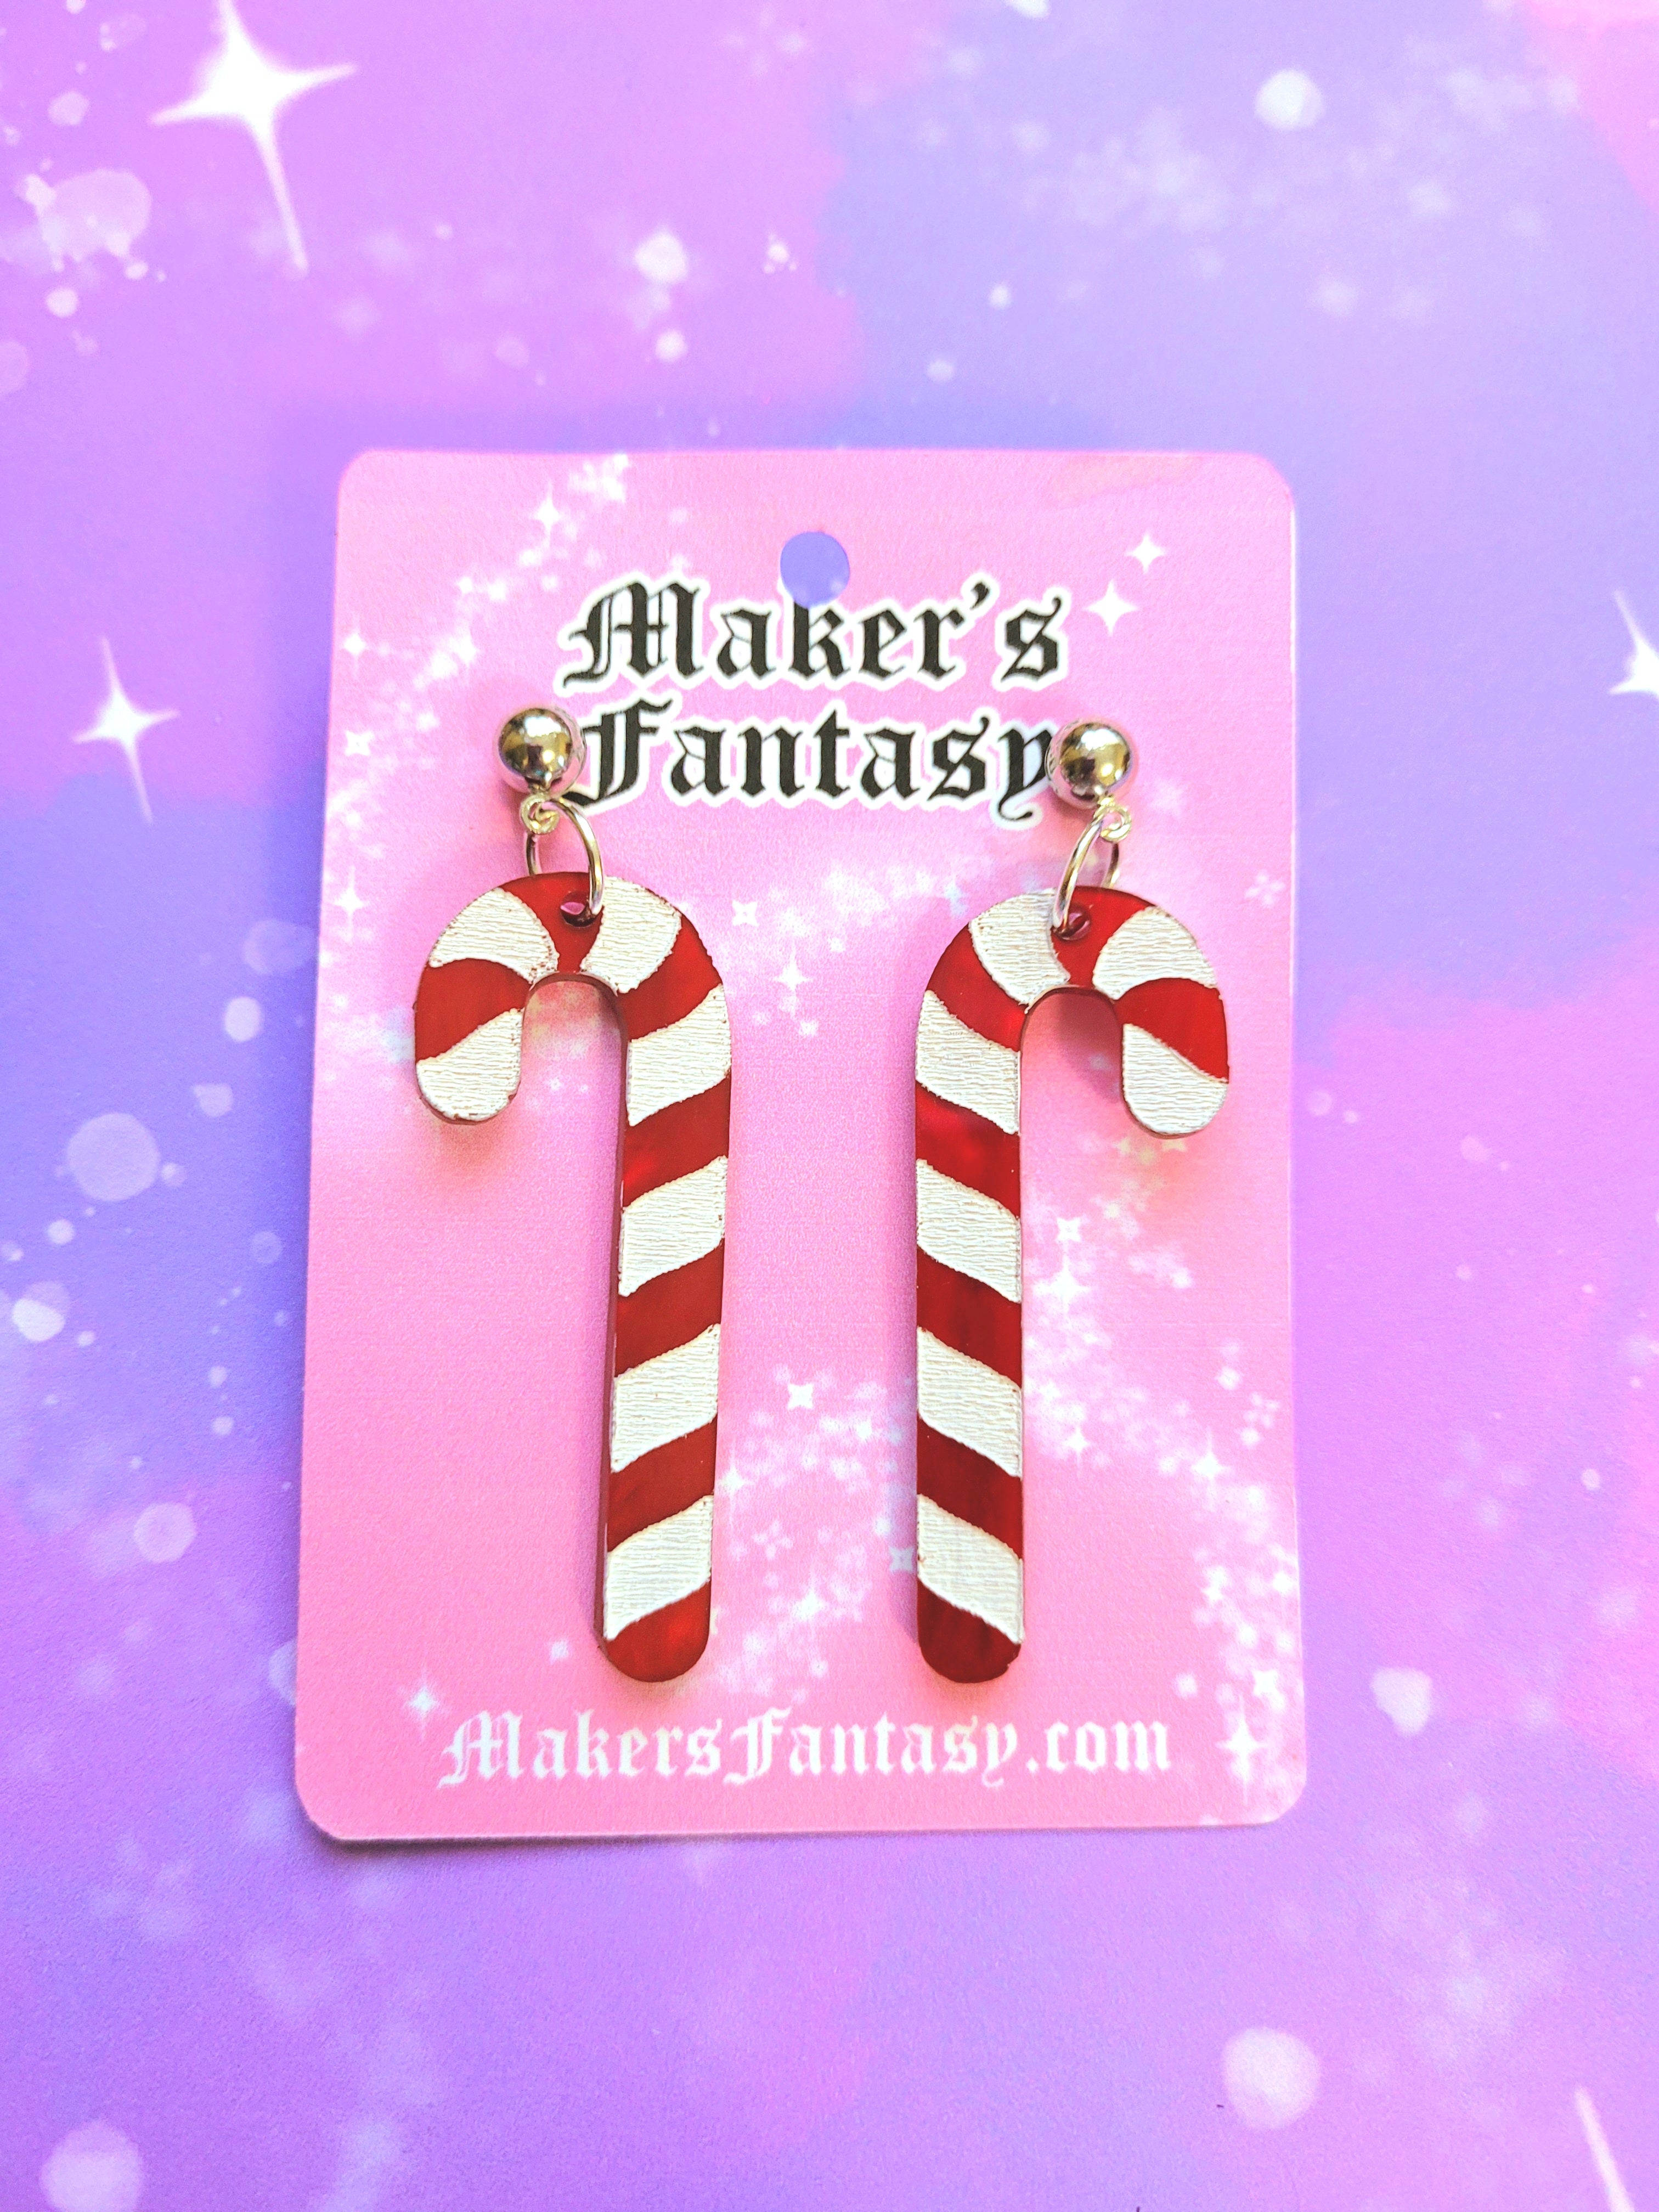 Candy Cane Earrings Makers Fantasy 